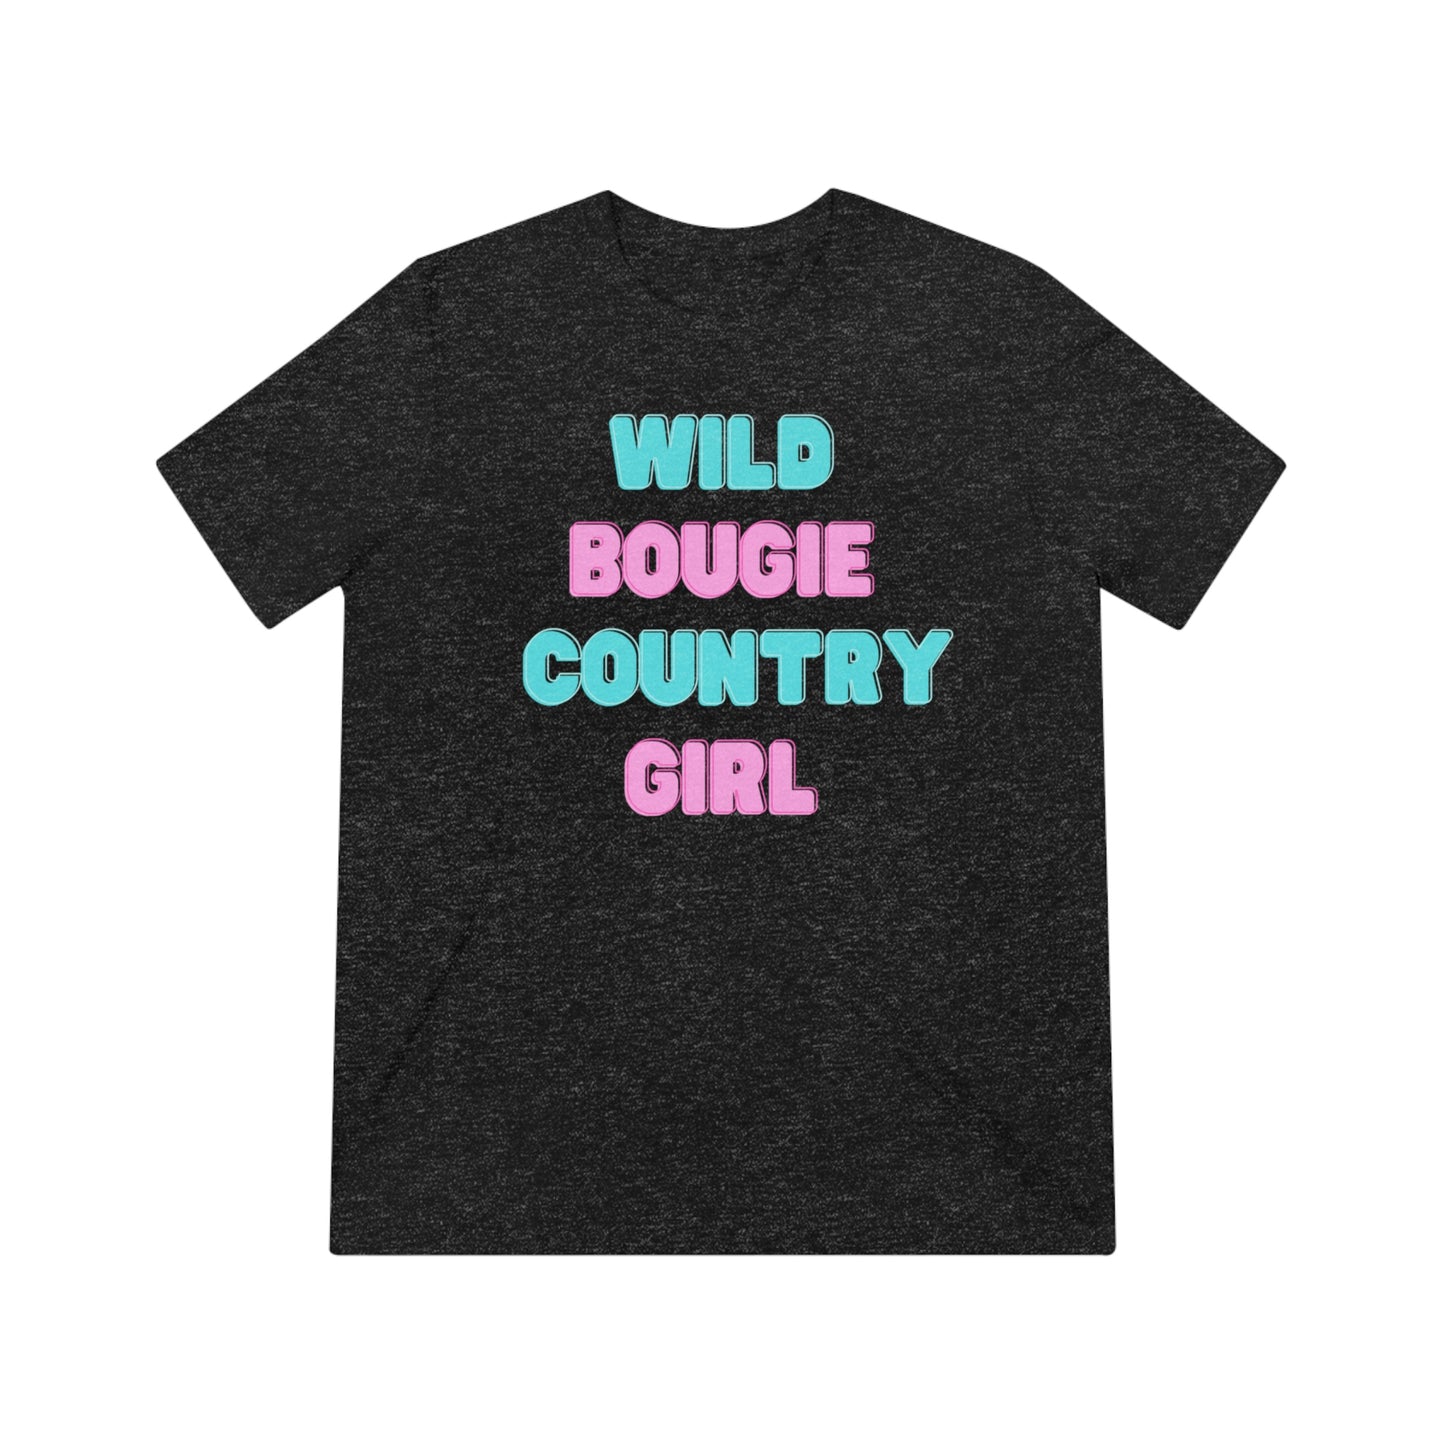 Wild Bougie Country Girl